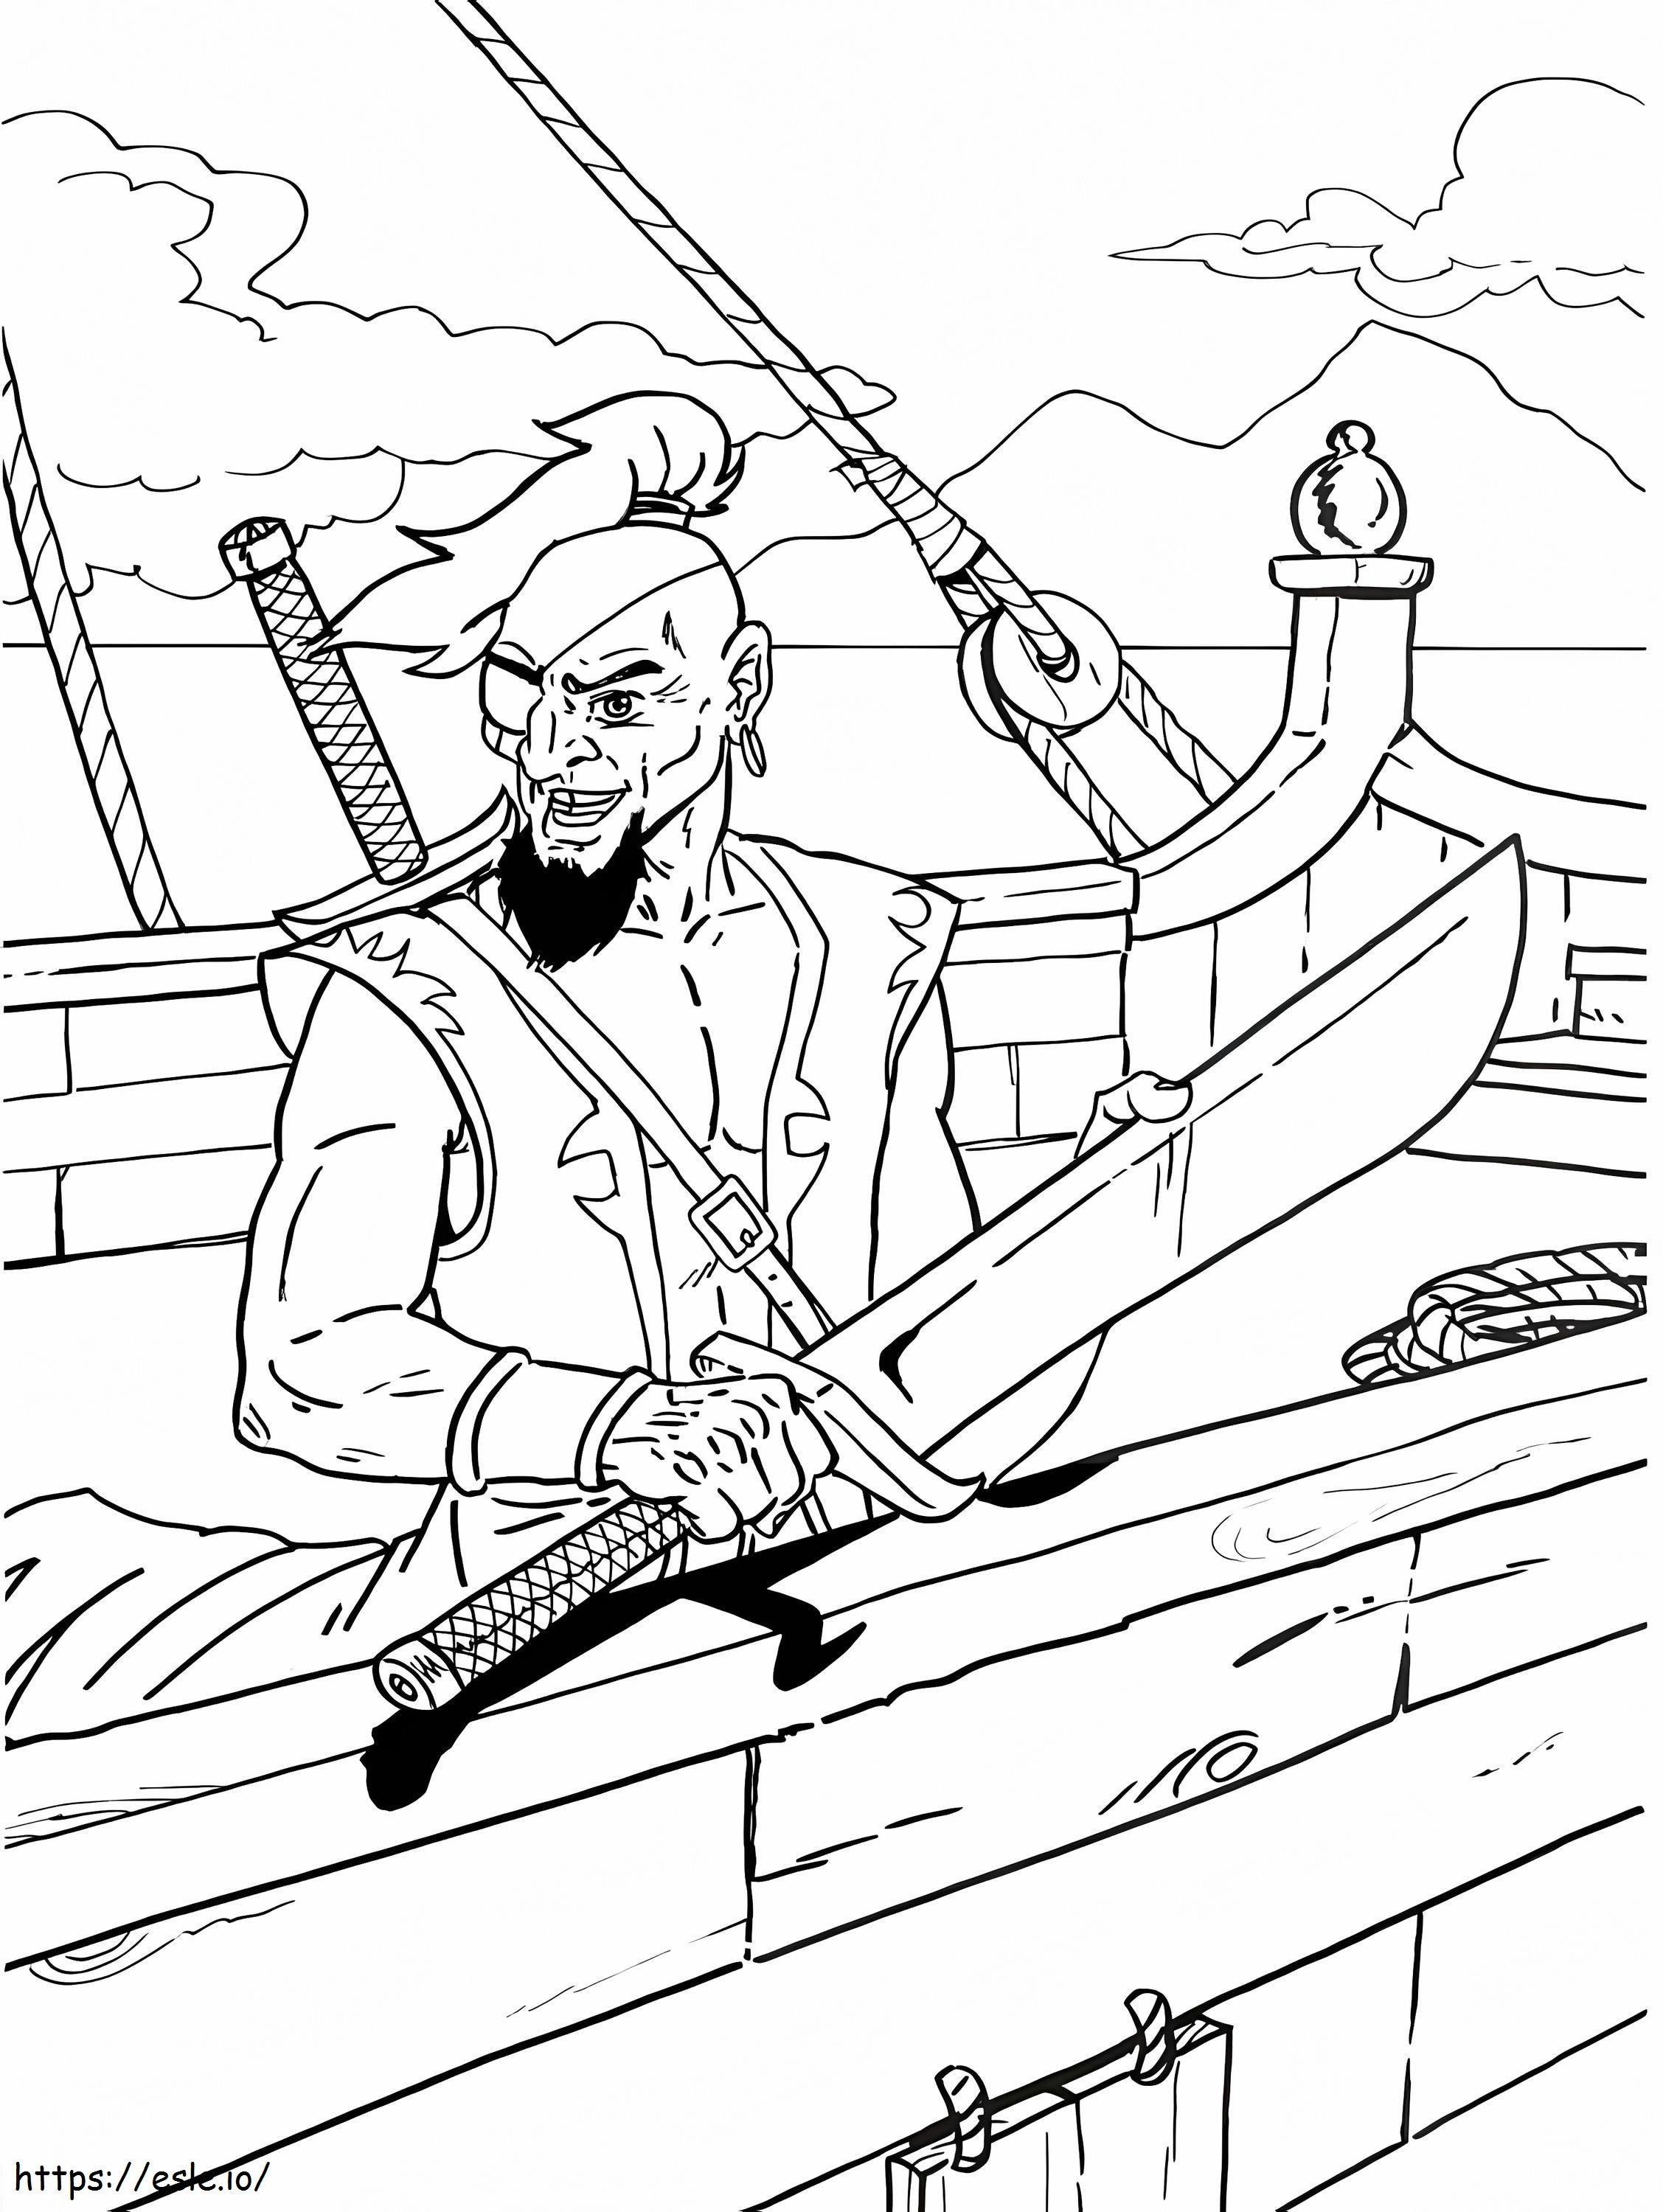 Pirate Brandishing His Sword coloring page